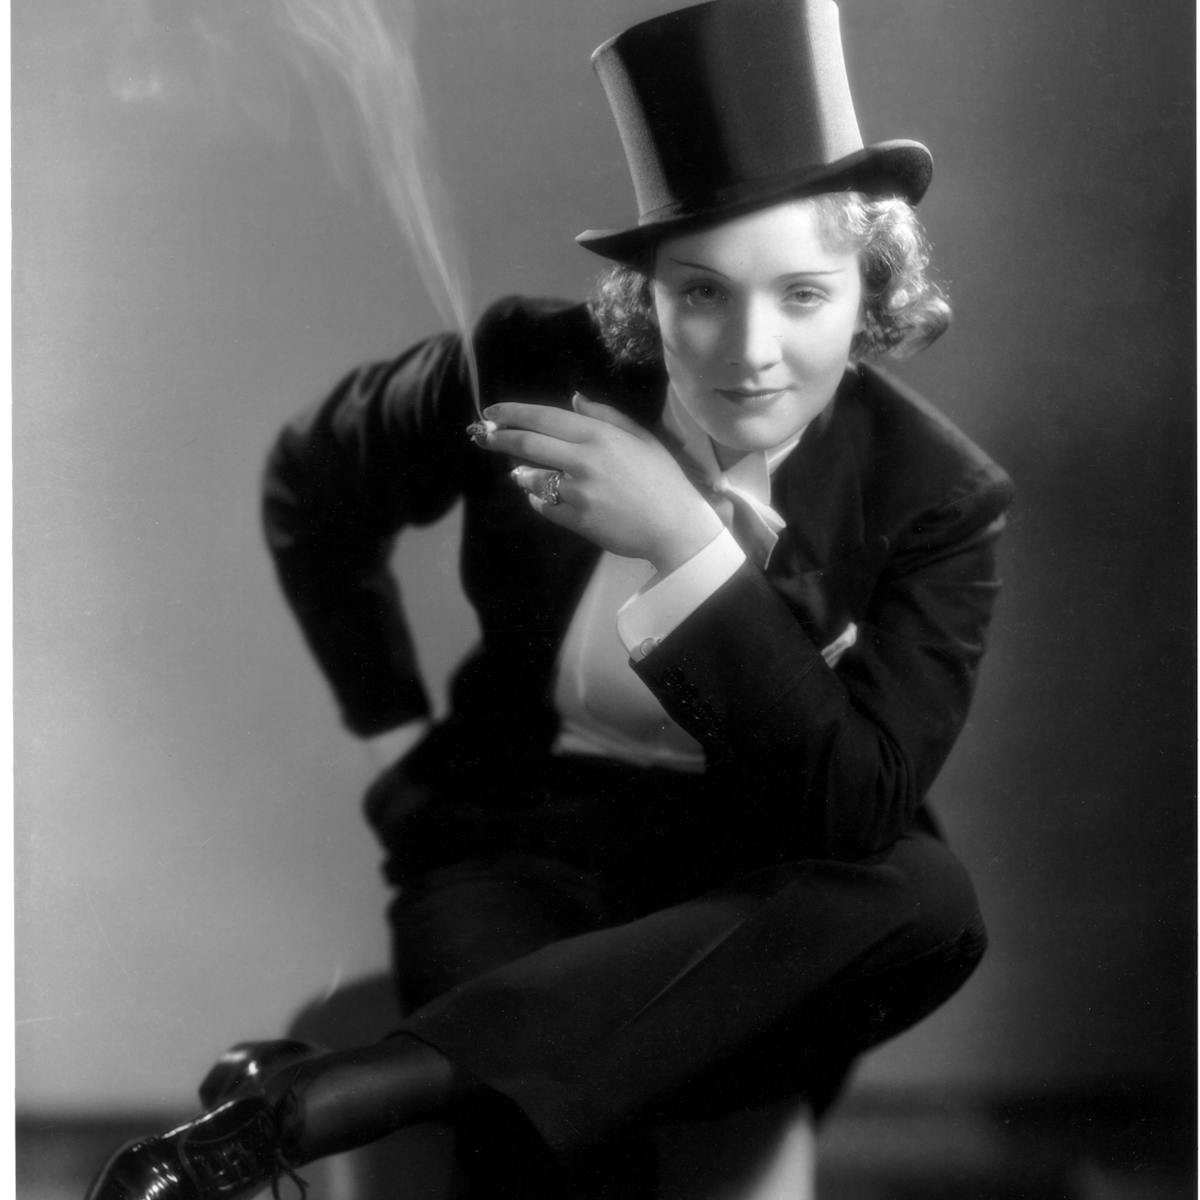 Marlene Dietrich in Morocco wears a suit and top hat, and smokes a cigarette.